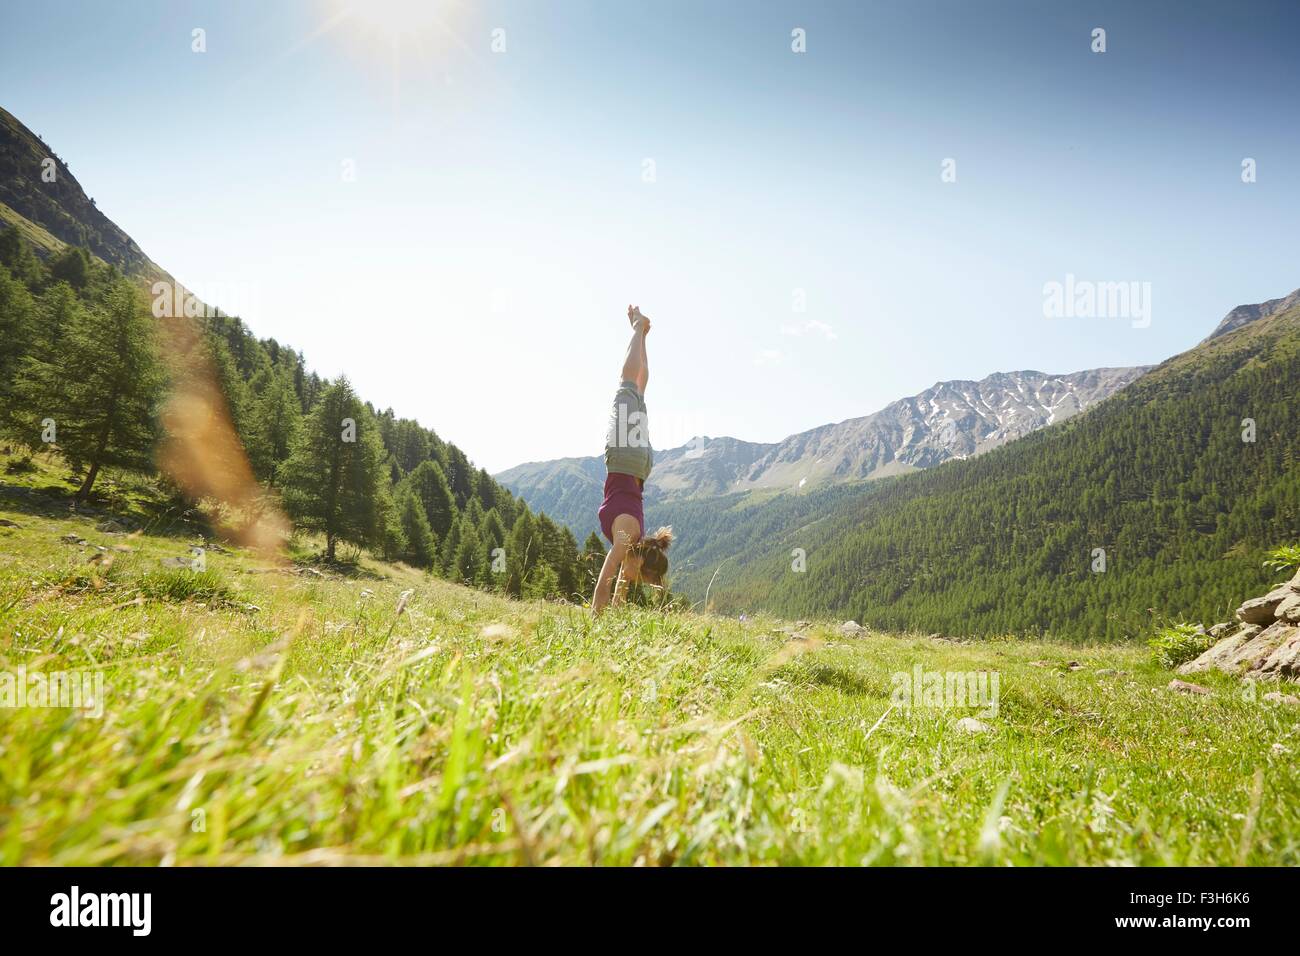 Young woman doing handstand, Val Senales, South Tyrol, Italy Stock Photo